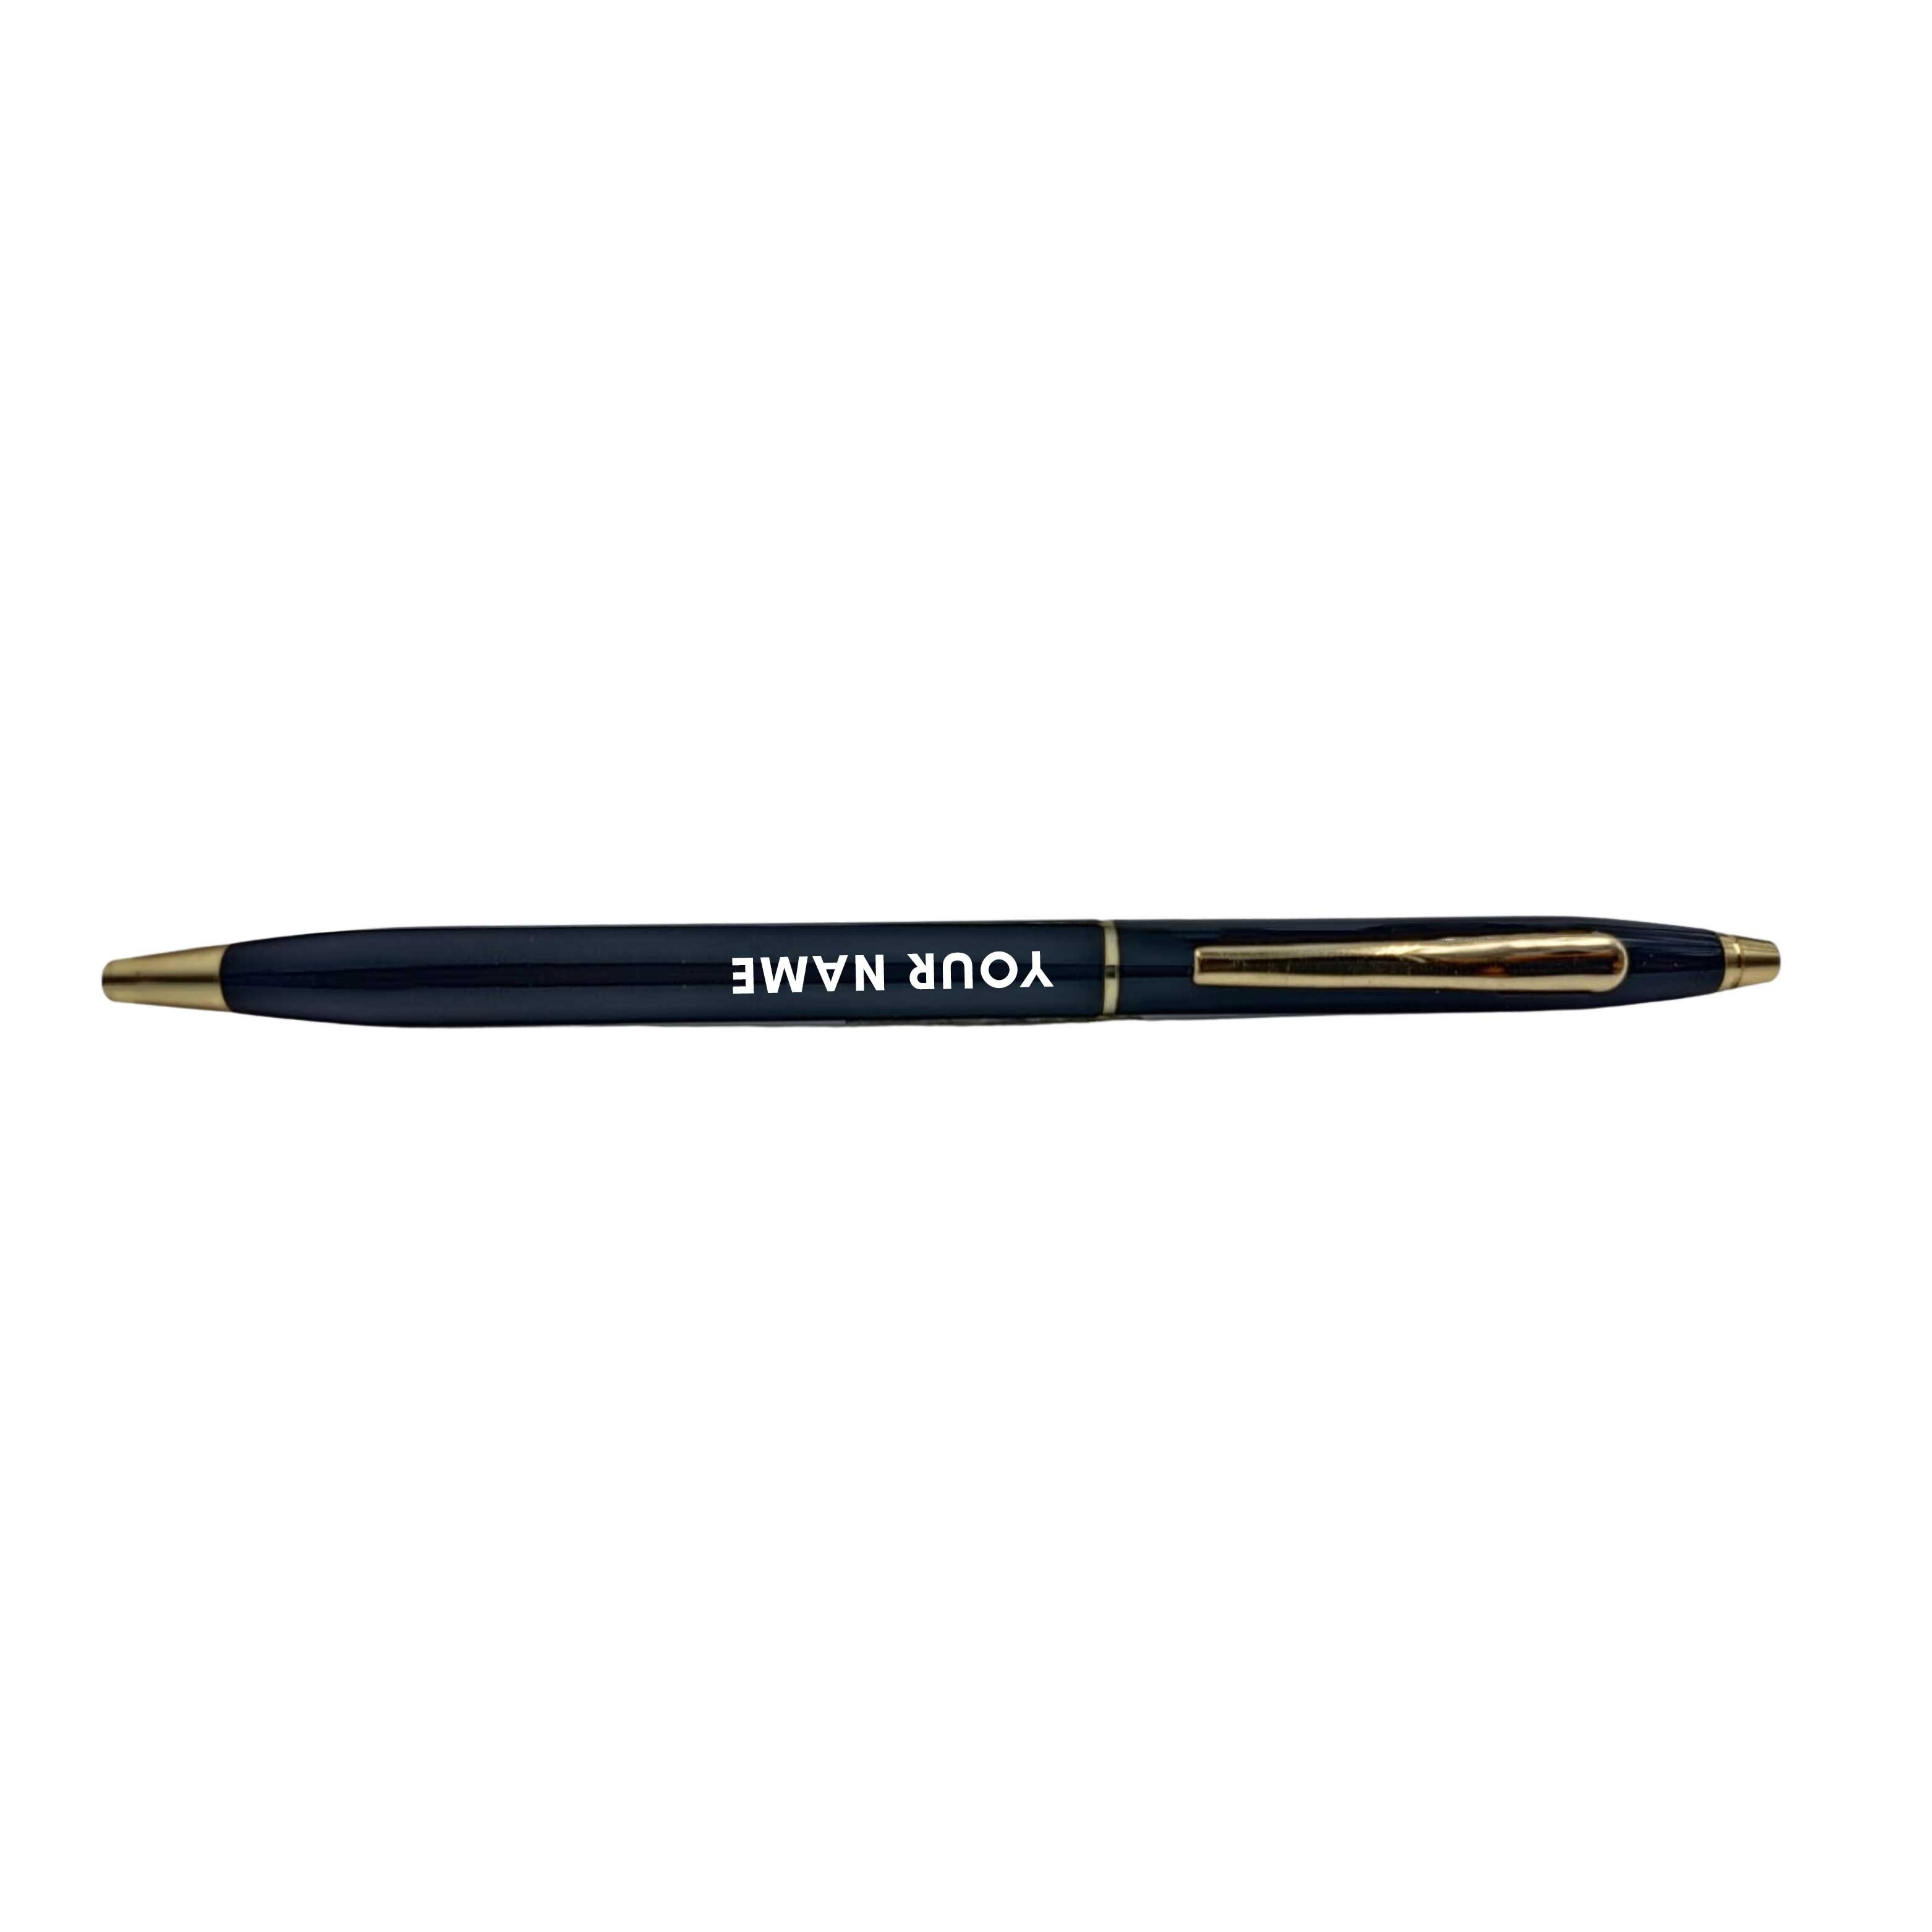 Name Pen – Personalized Brass Pen - Customized Name Pen - Corporate Gi –  BBD GIFTS